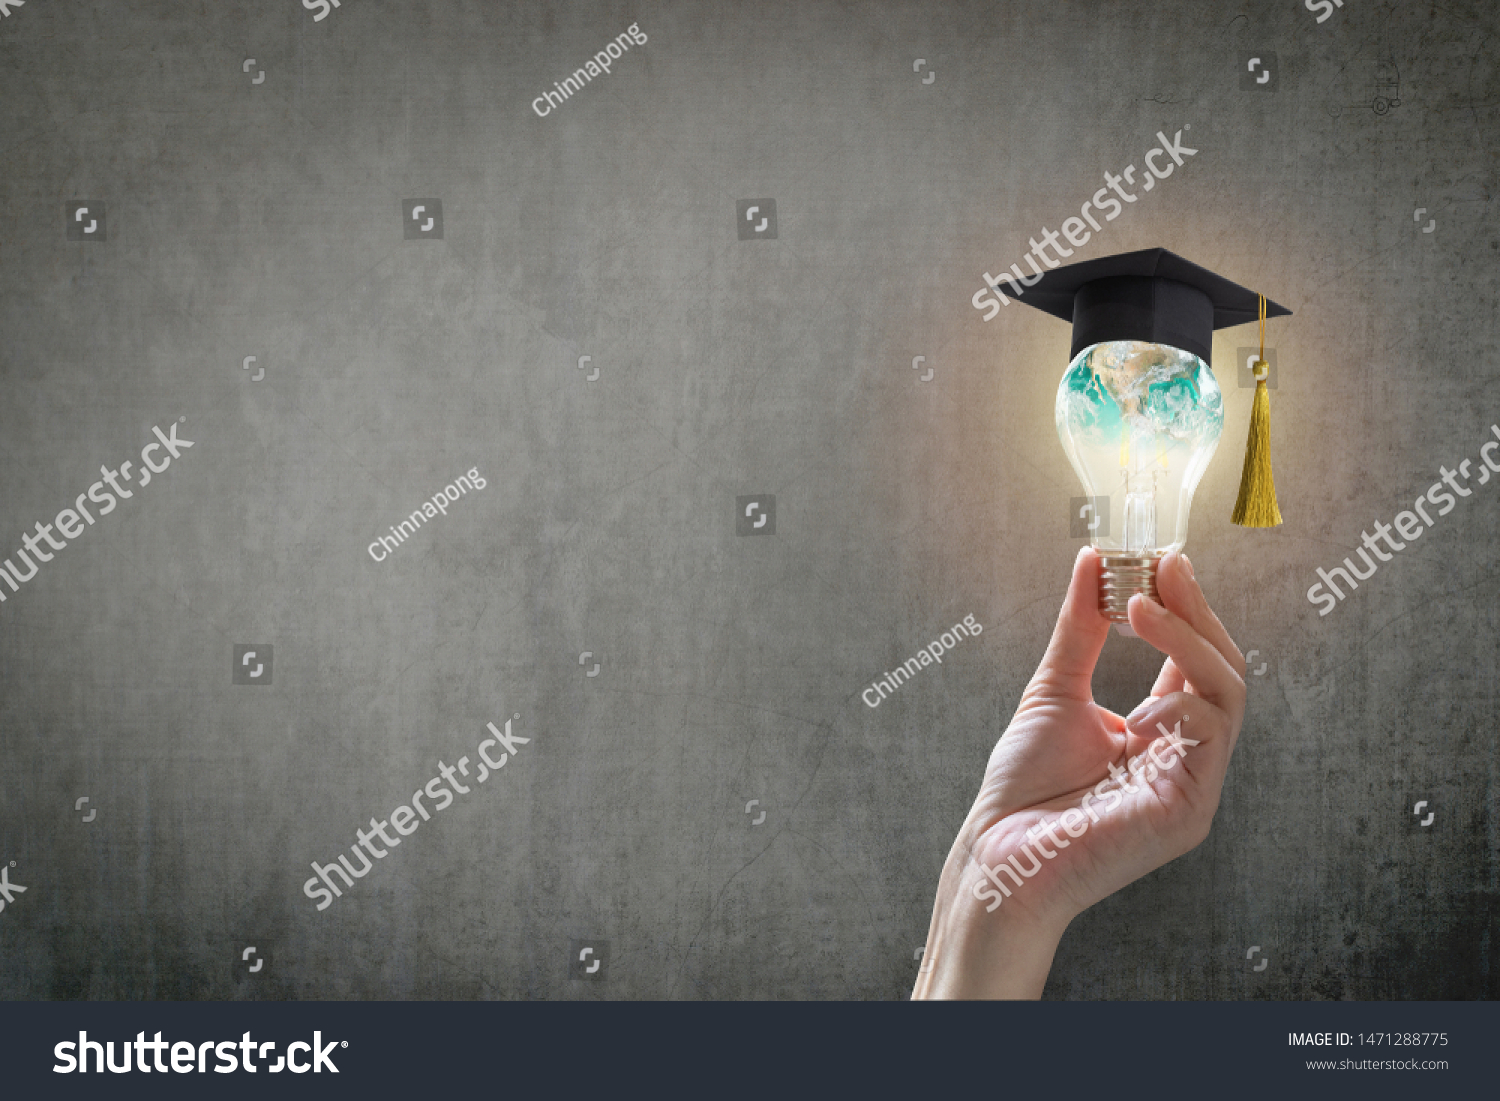 Innovative learning, creative educational study concept for graduation and school student success with world lightbulb on teacher chalkboard #1471288775